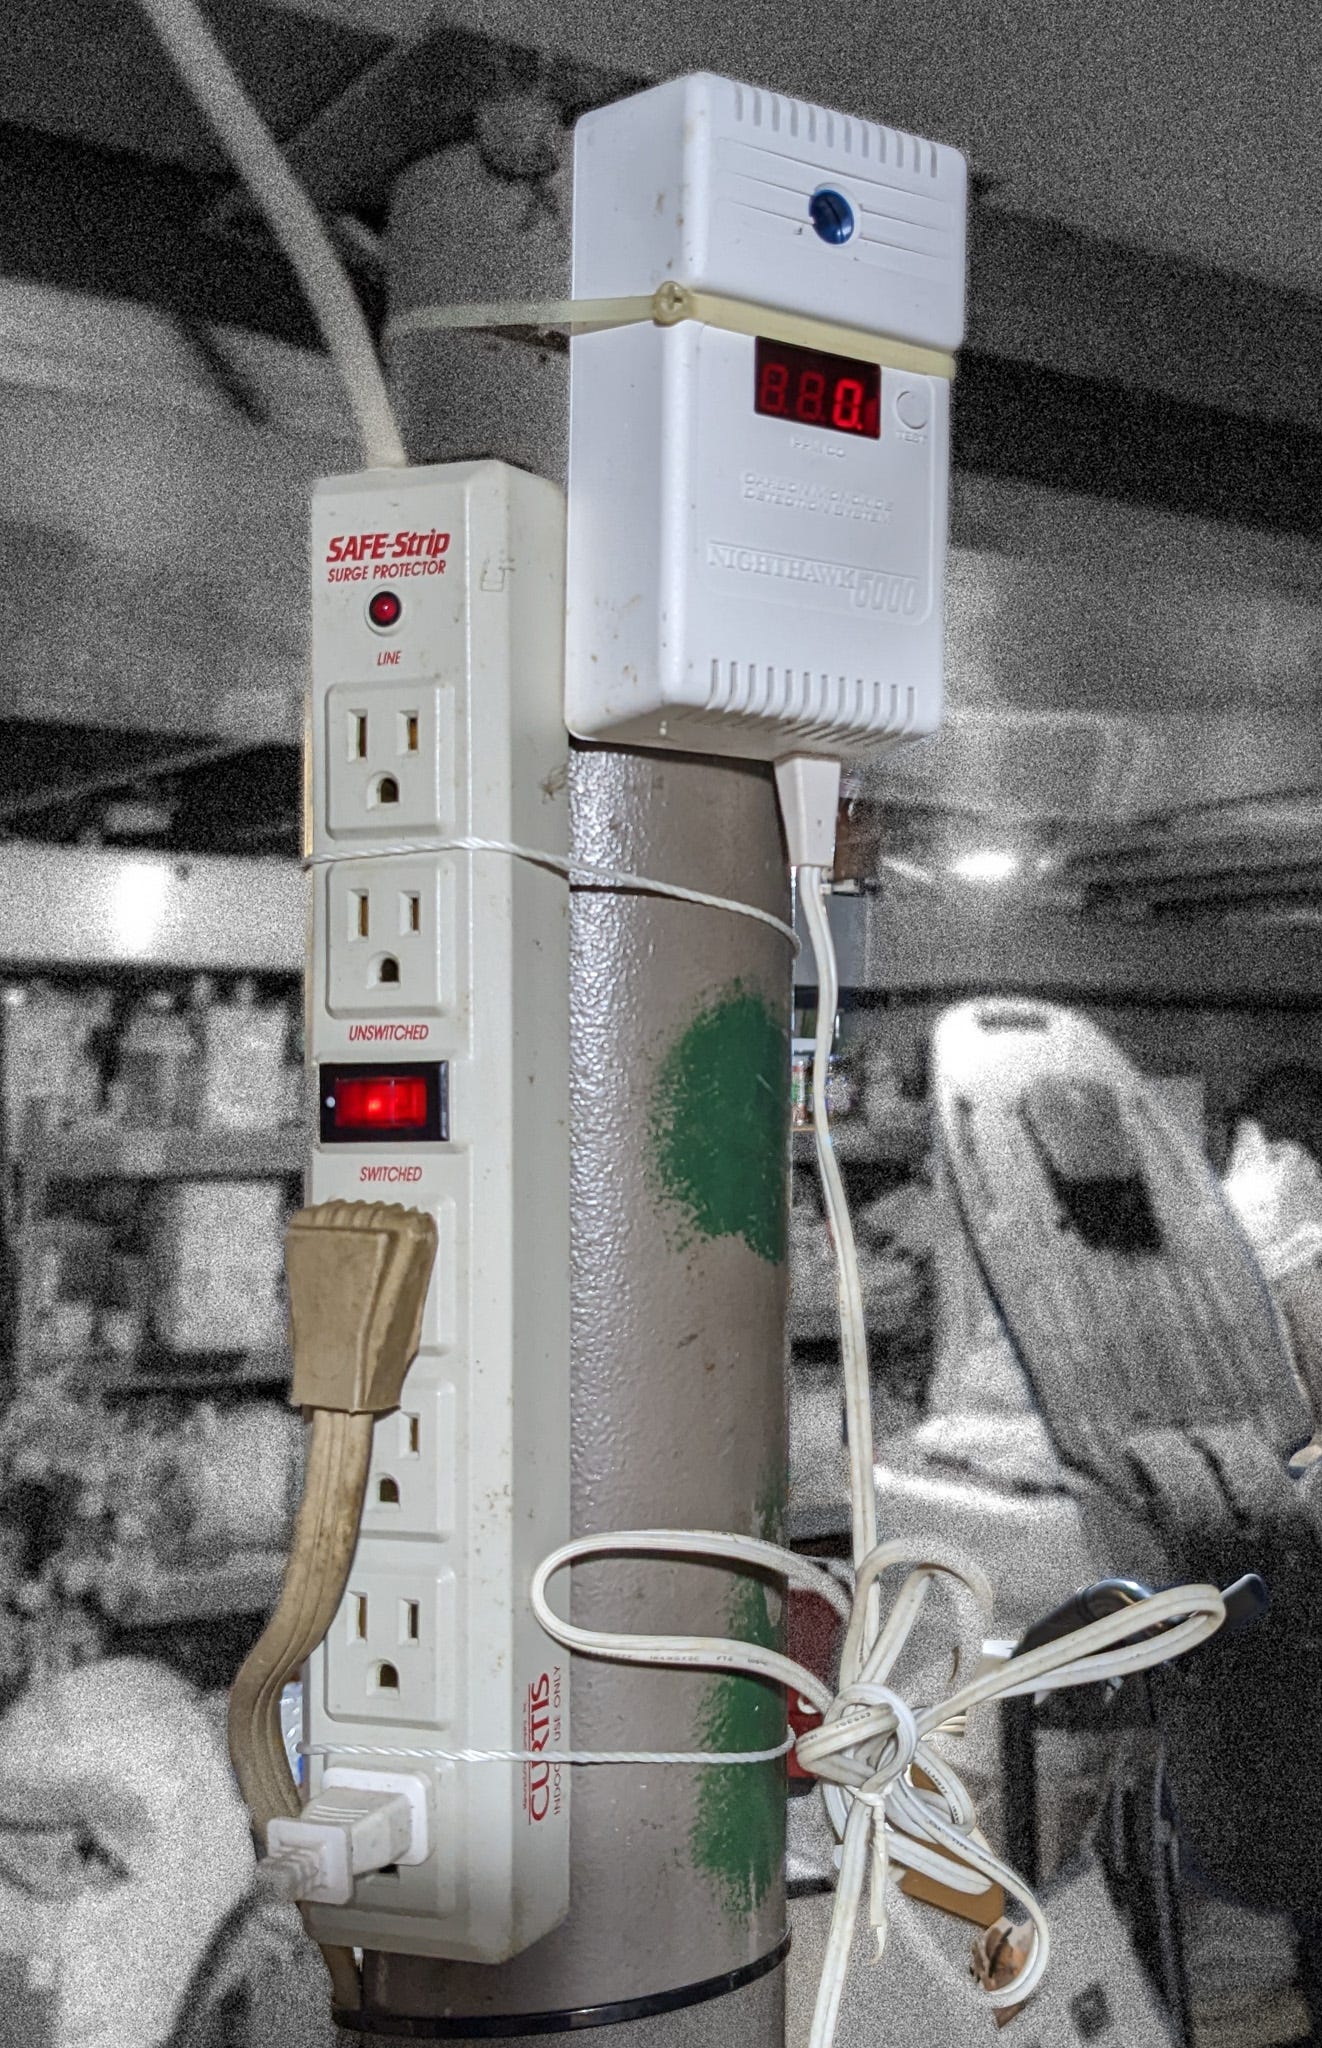 A photograph taken in a very cluttered basement. The focus is on a post -- a sturdy pipe -- between the floor and ceiling; to the post are affixed a surge protector and a programmable household security device. The surge protector has a couple of things plugged into it, and a glowing red rocker switch labeled (in red) "UNSWITCHED" and "SWITCHED."